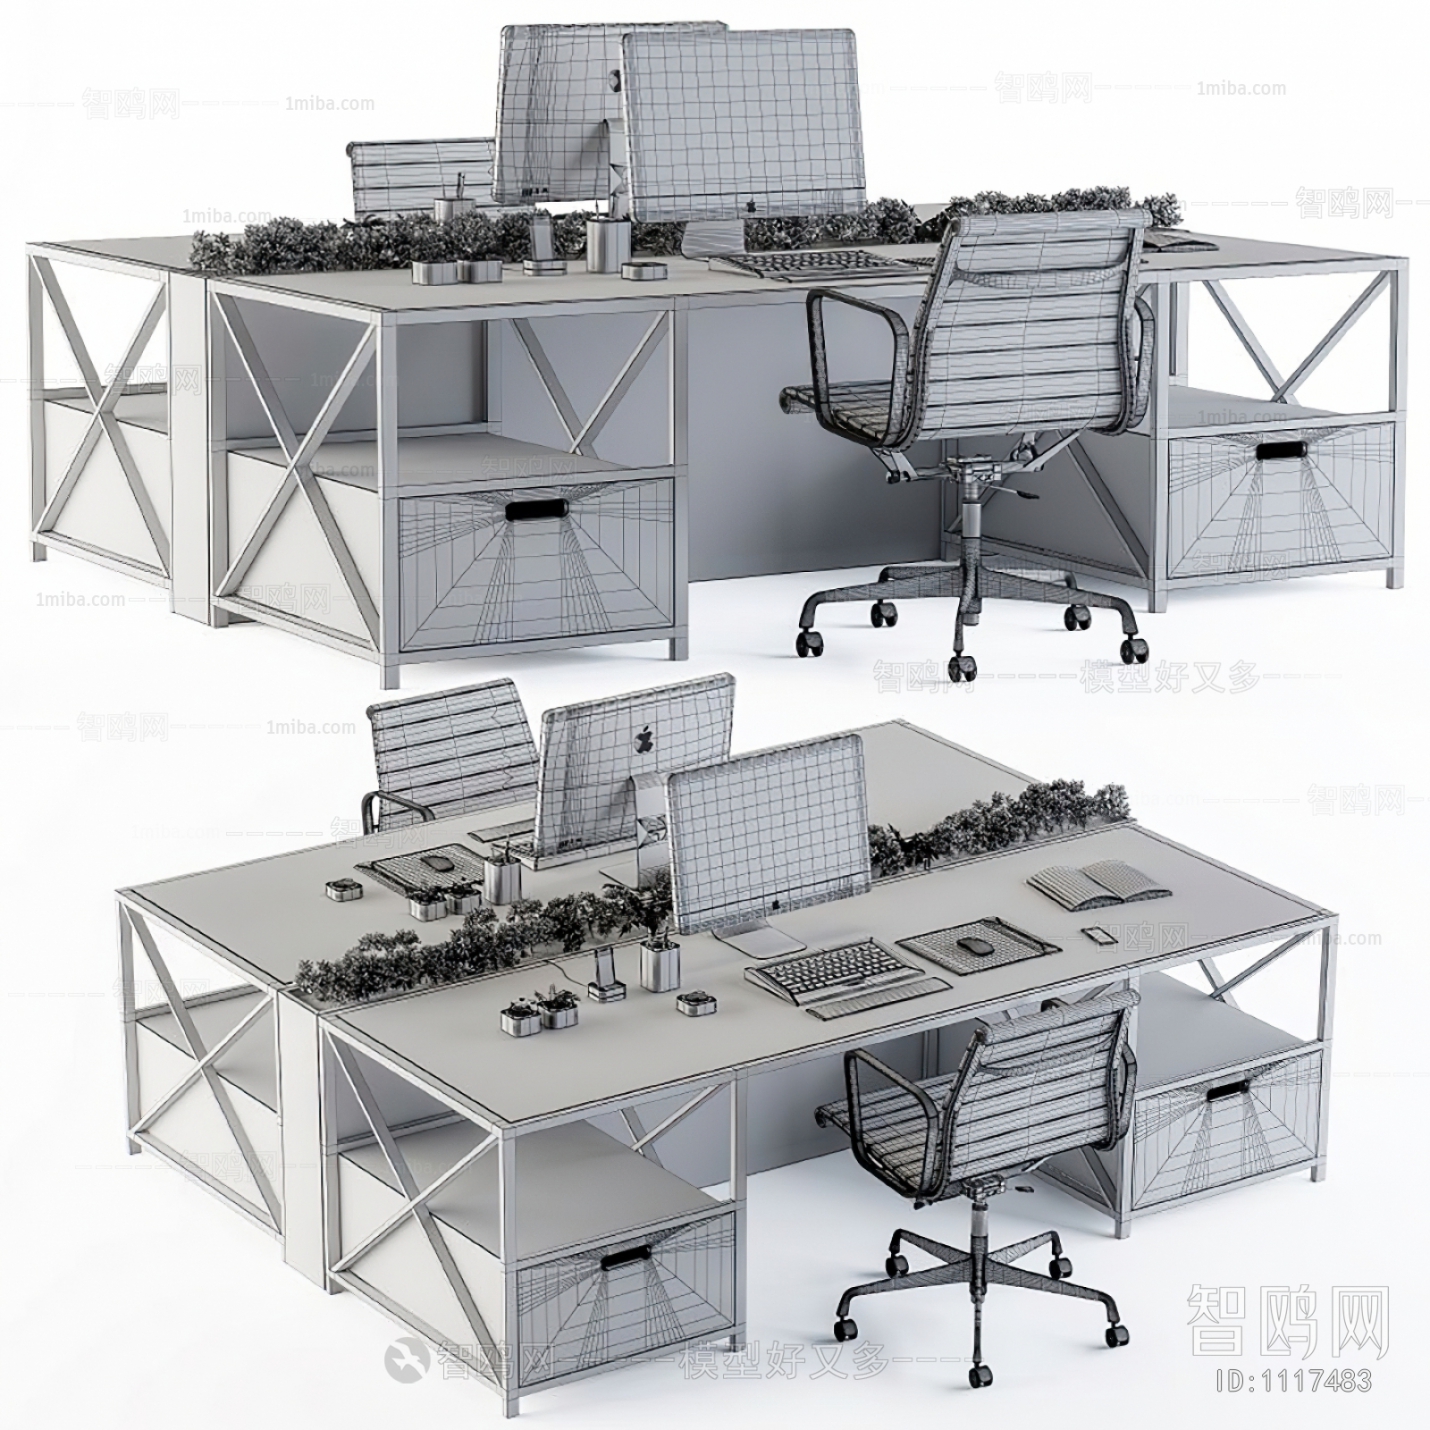 Industrial Style Office Table